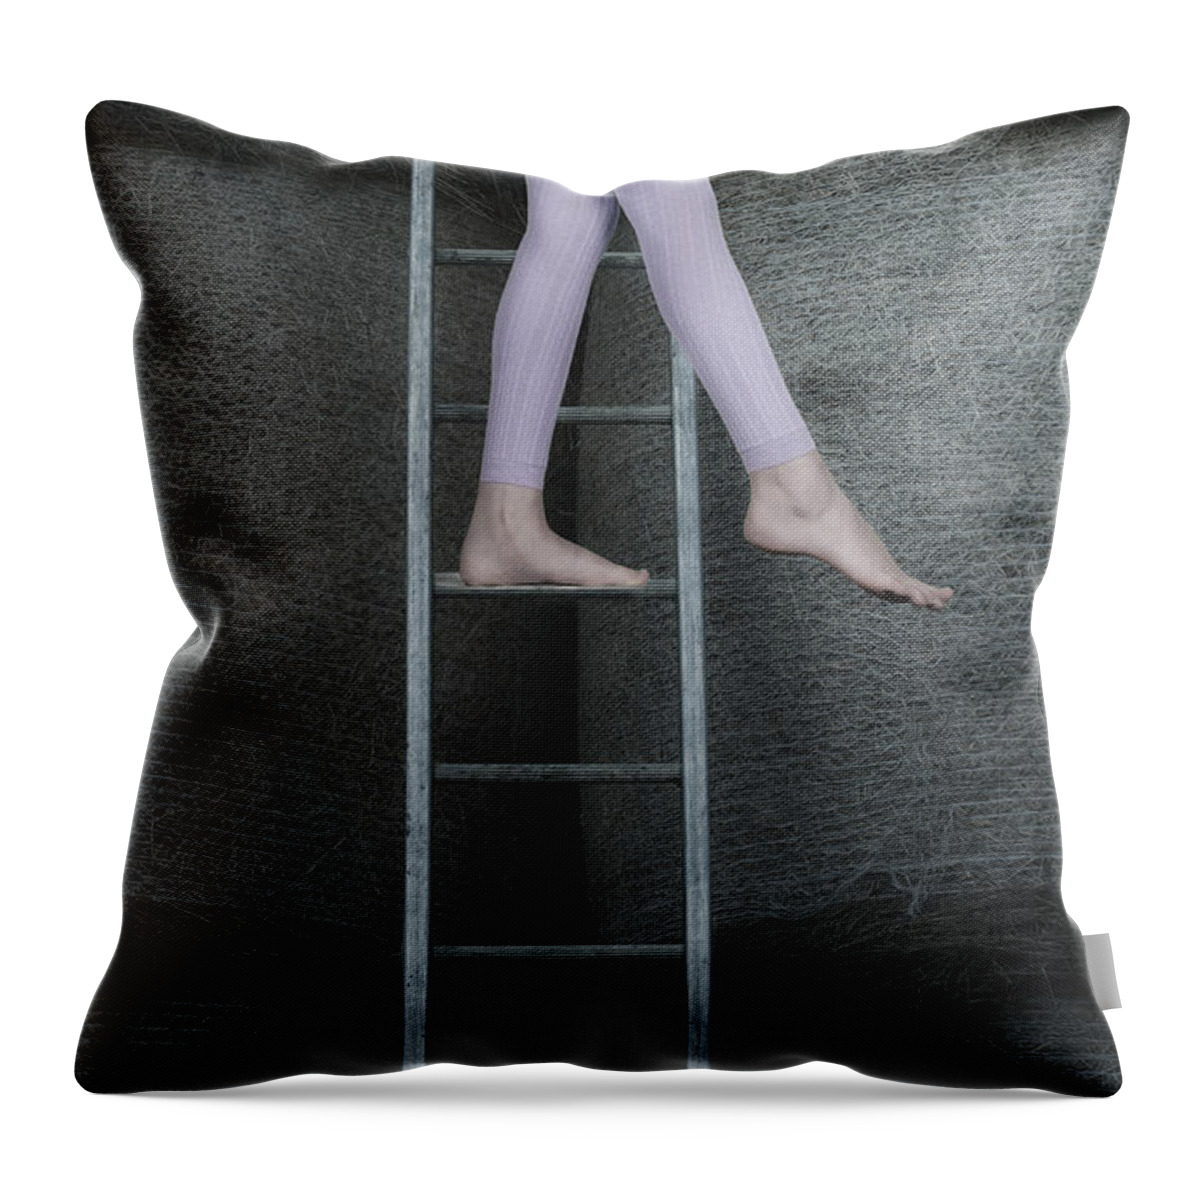 Girl Throw Pillow featuring the photograph Stepping Into The End by Joana Kruse